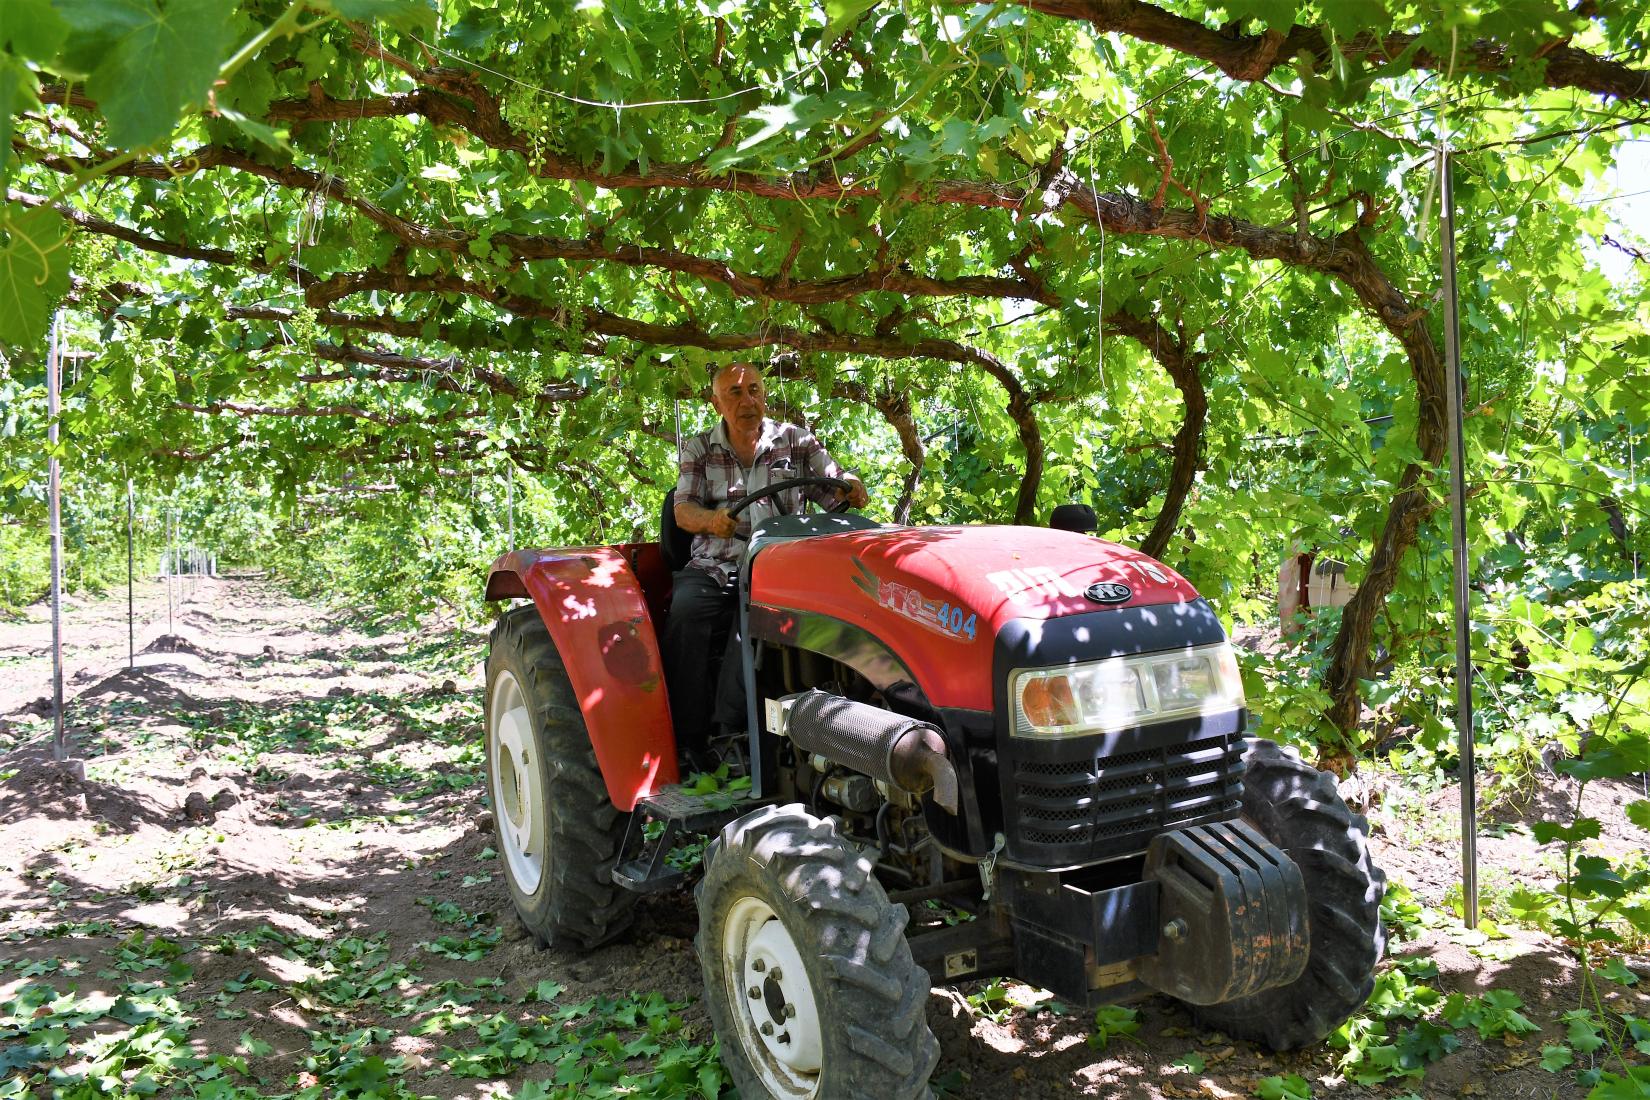 A man on a red car in his vineyard.